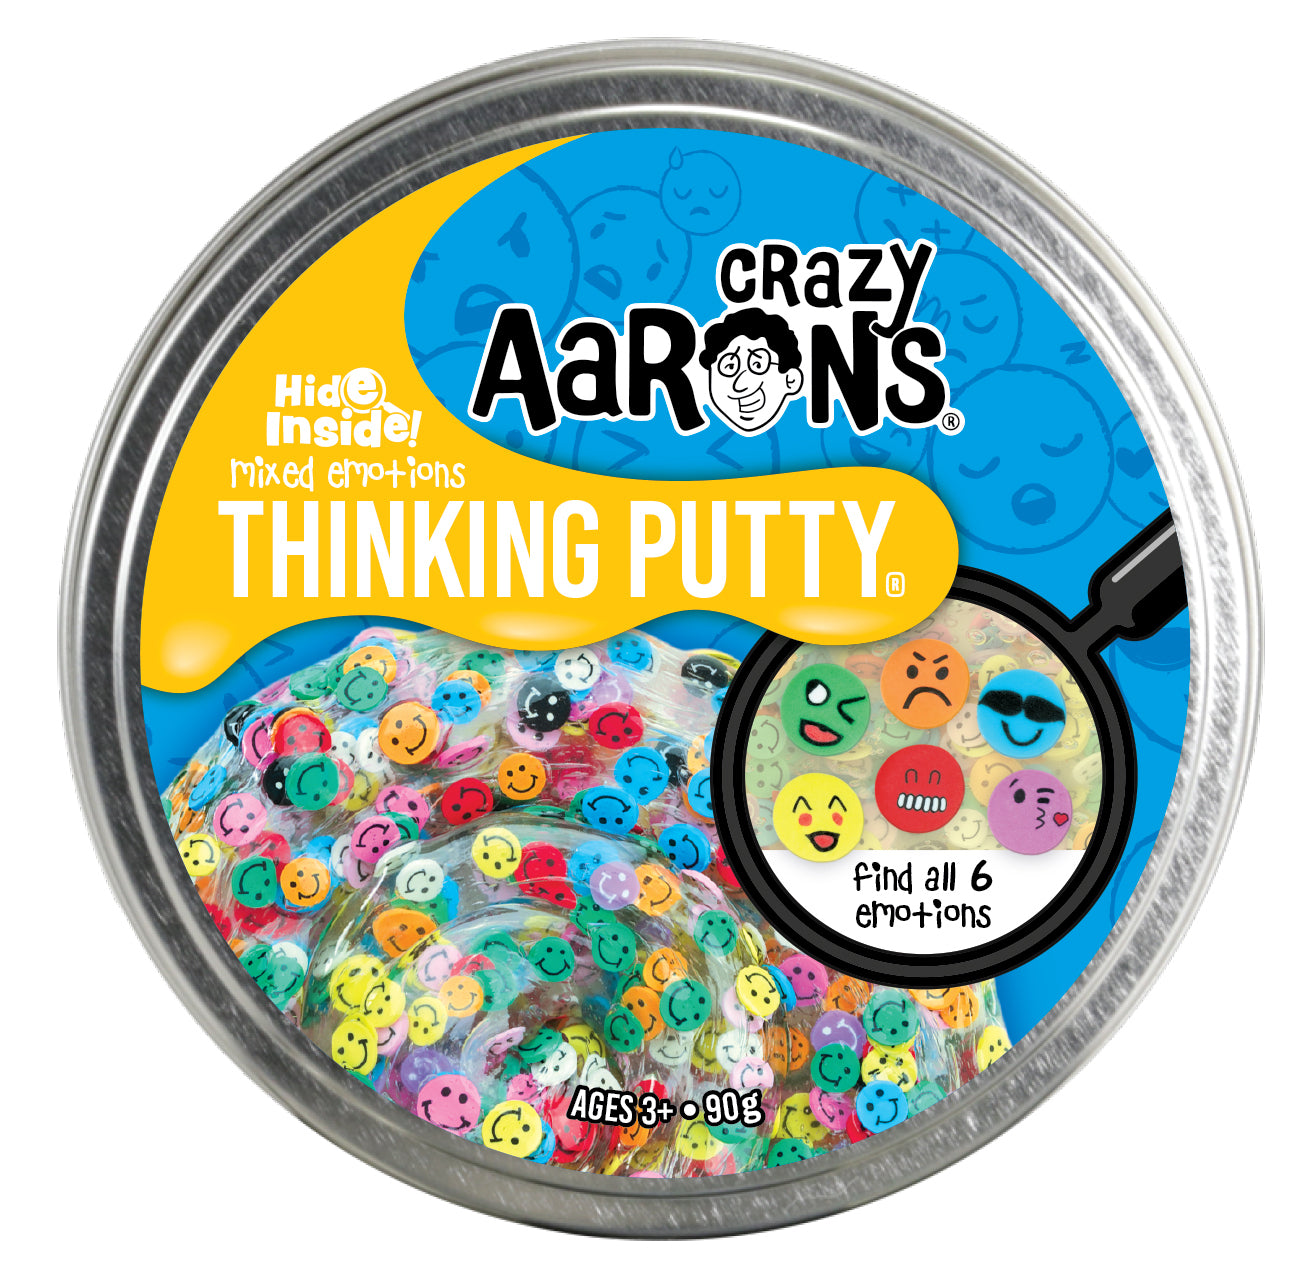 Crazy Aarons - Thinking Putty - Mixed Emotions